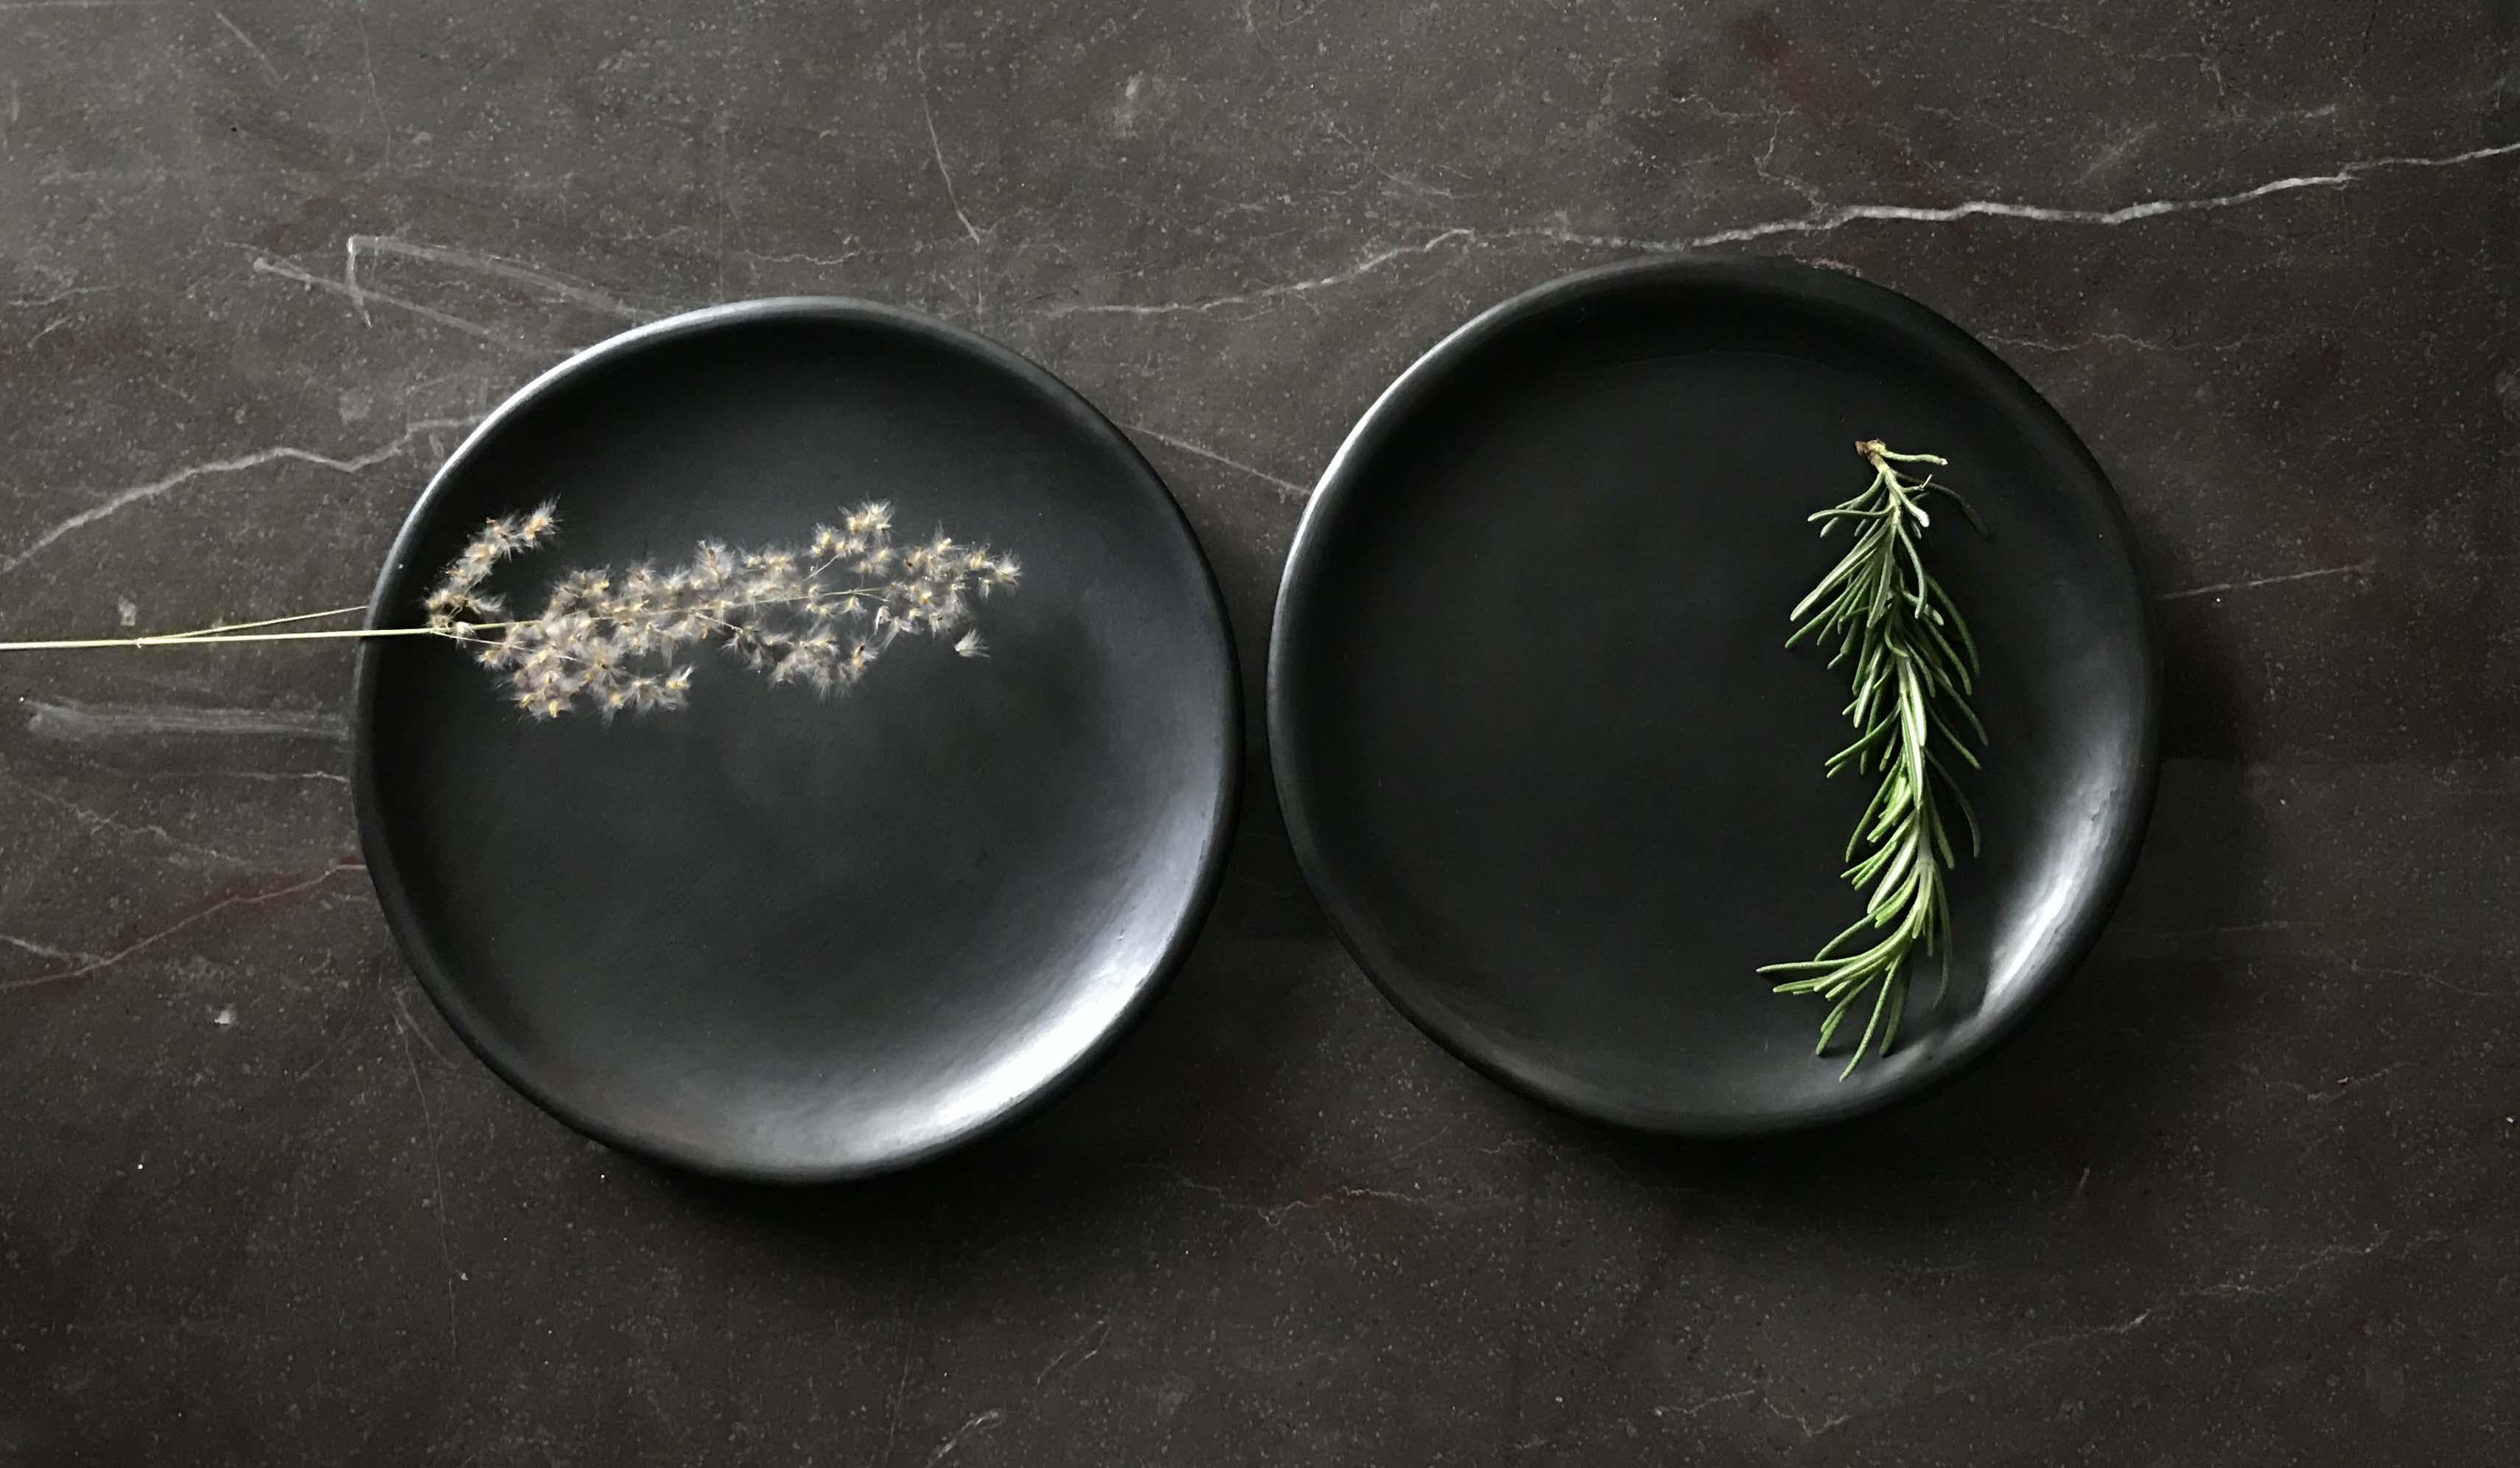 Oaxacan black claycm plates handmade tableware burnished barro negro Oaxaca. Set of 4 pieces 

The soft and rich colour makes this side plate a stylish partner to bread, butter or more spectacular starters.

Handmade in Oaxaca, a state rich in